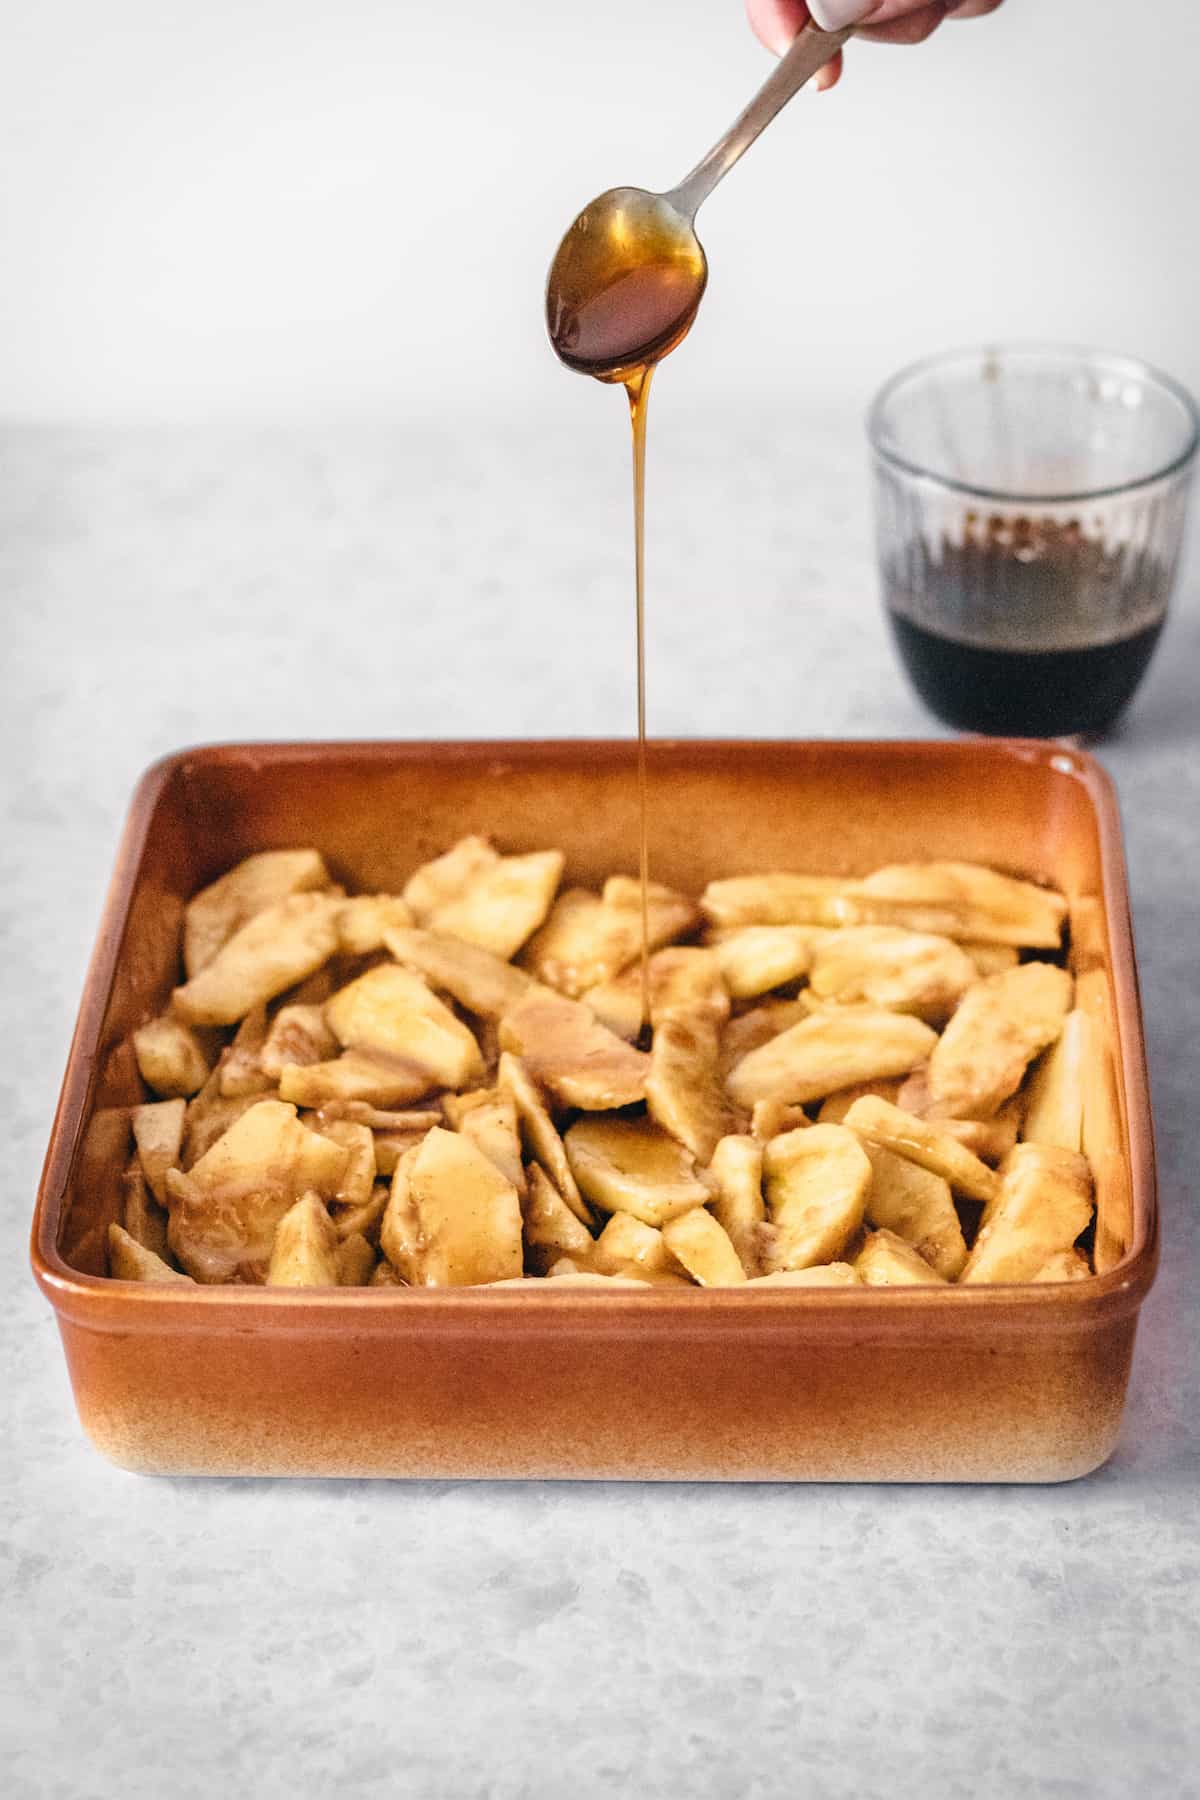 Caramel being poured over apple slices in a baking dish